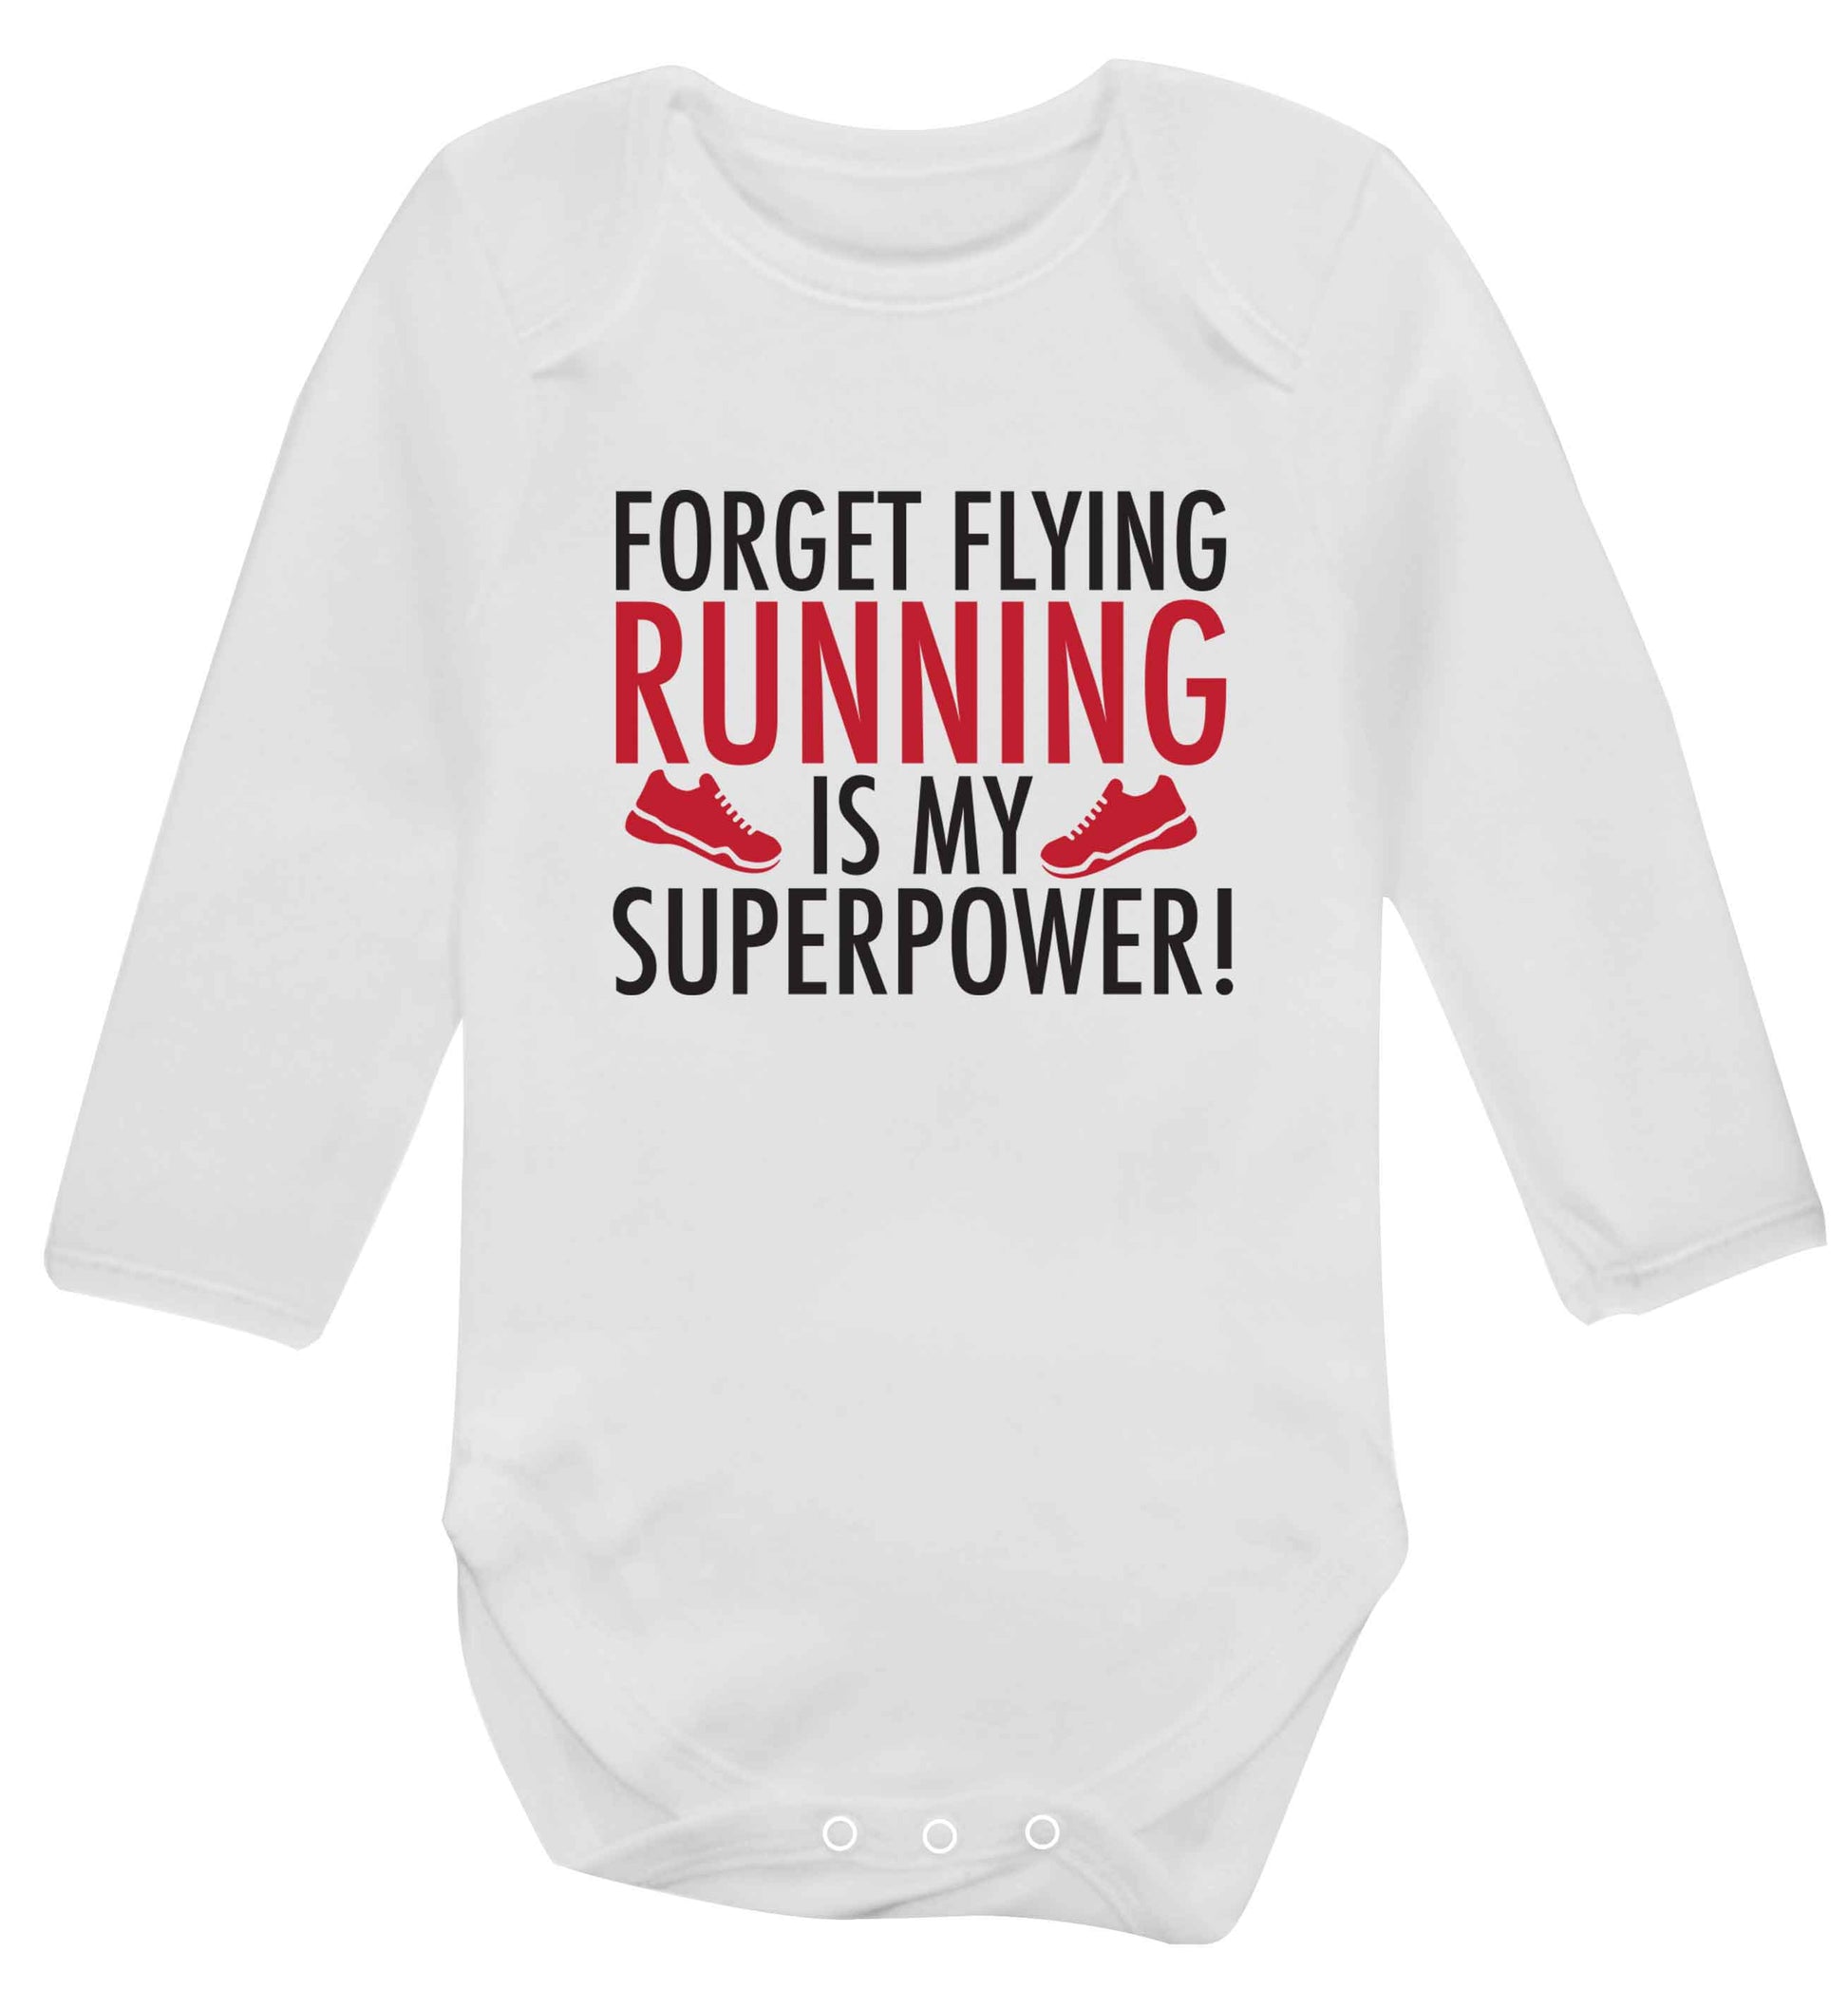 Crazy running dude baby vest long sleeved white 6-12 months